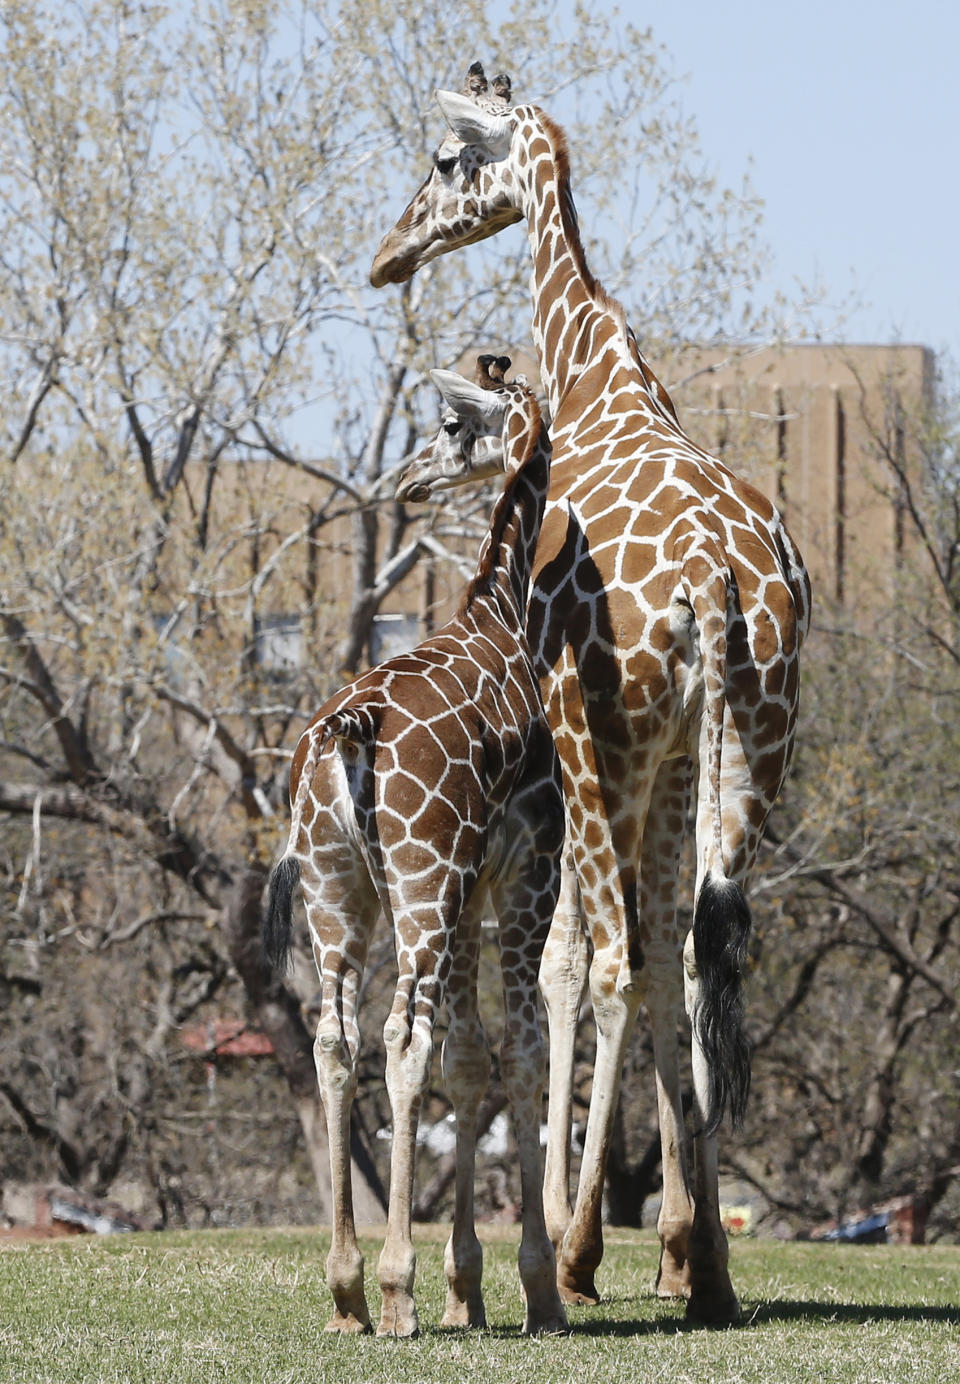 Six-month-old Kyah, a giraffe at the Oklahoma City Zoo, stands next to her mother, Ellie, at the zoo in Oklahoma City, Friday, April 4, 2014. Kyah will undergo surgery at Oklahoma State University to repair a vessel in her heart that has wrapped around her esophagus, making it difficult for her to eat solid foods, at a time when her mother is trying to wean her. (AP Photo/Sue Ogrocki)